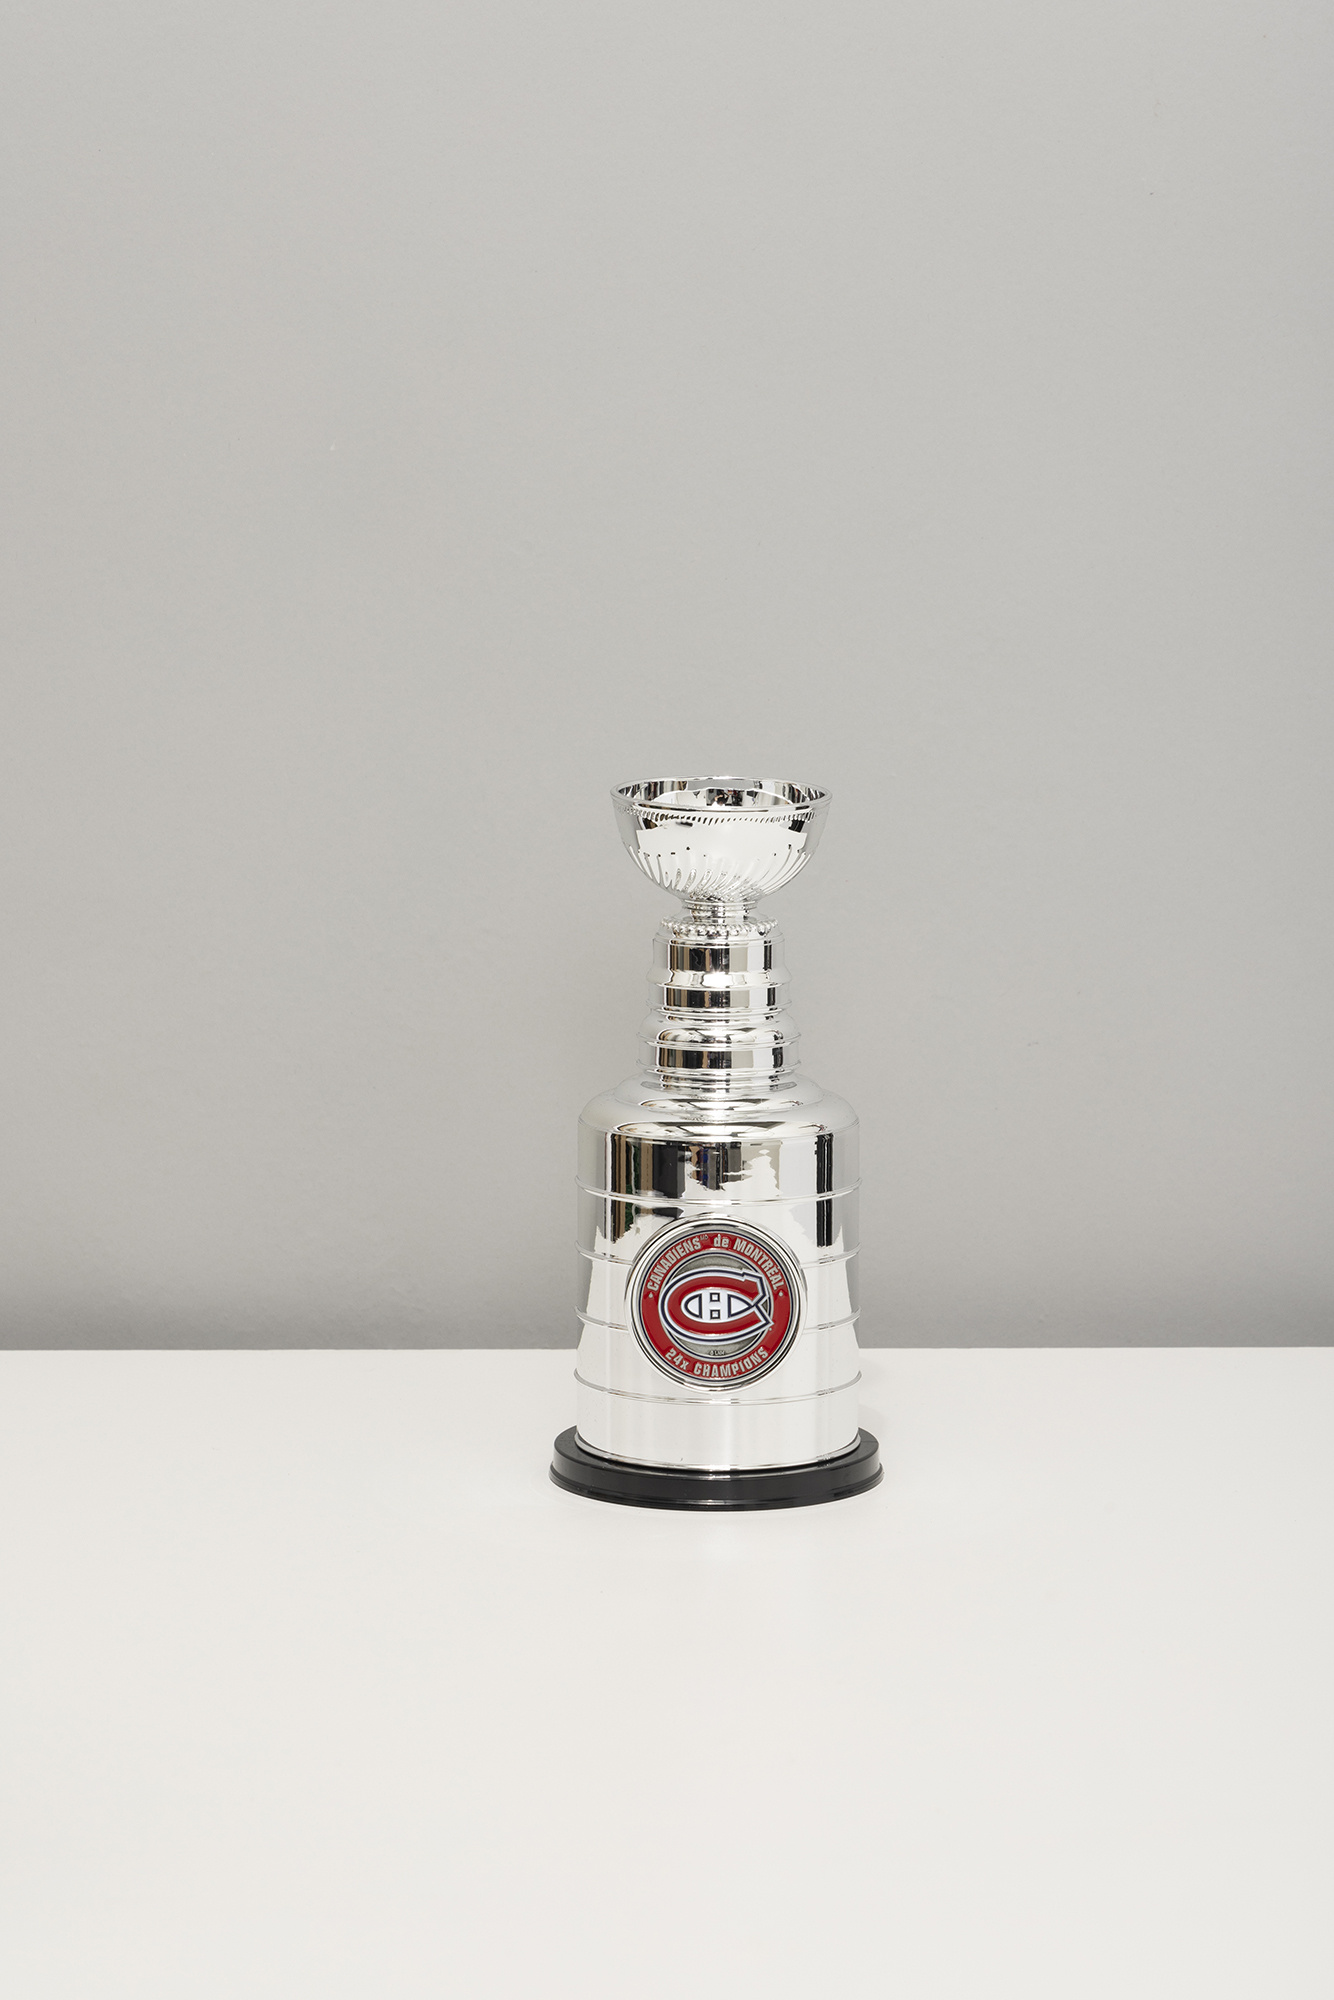 https://cdn.shoplightspeed.com/shops/608428/files/56543402/tricolore-sports-8-replica-stanley-cup-with-canadi.jpg